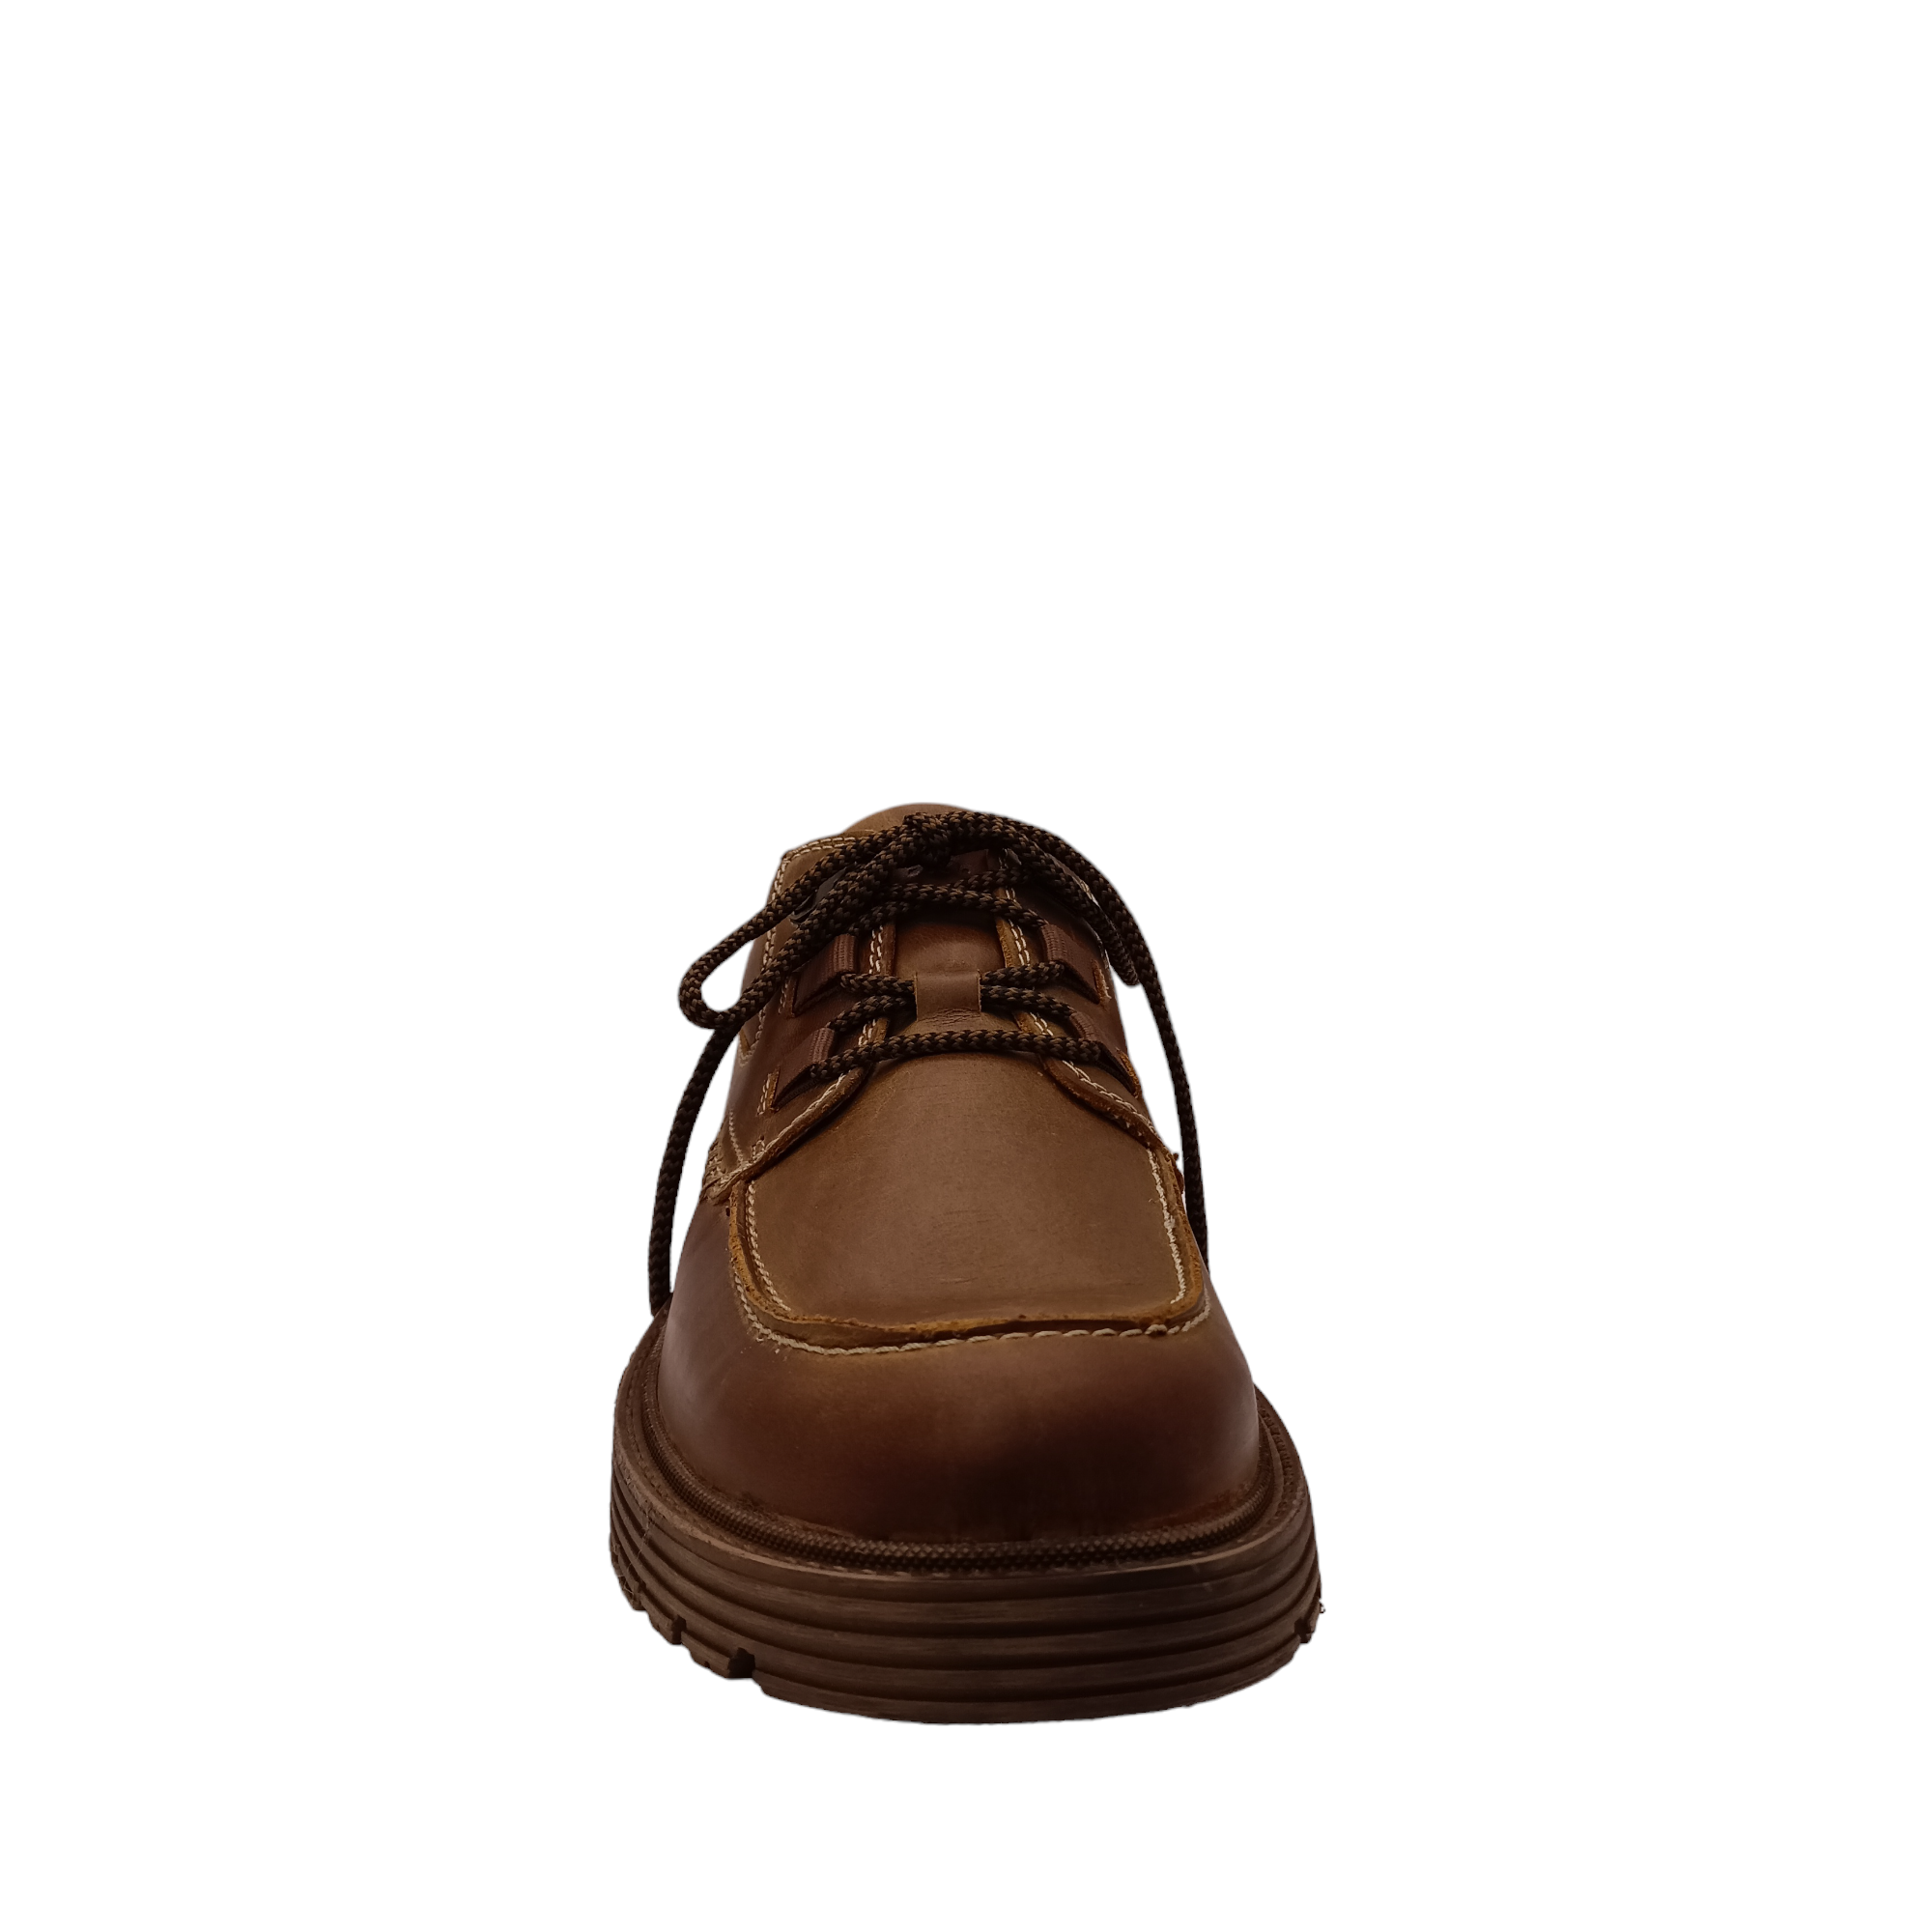 Shop Cooper 06 Josef Seibel - with shoe&amp;me - from Josef Seibel - Shoes - Mens, Shoe, Winter - [collection]